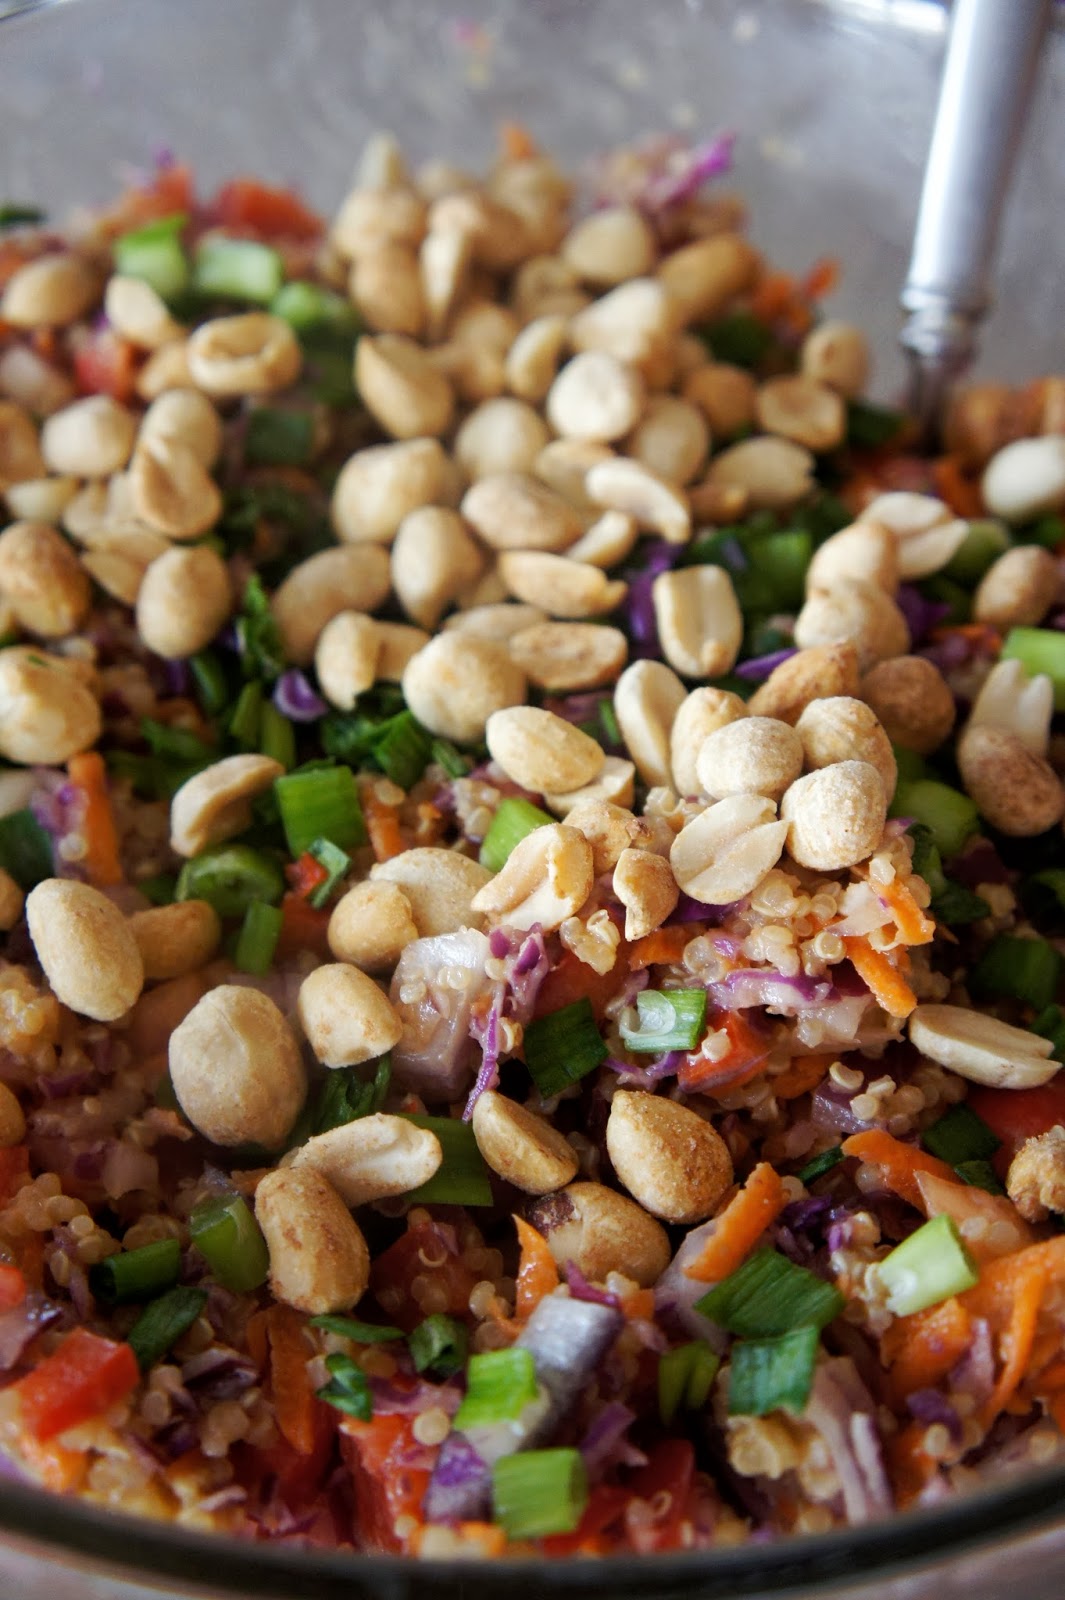 Savory Sweet and Satisfying: Crunchy Peanut Thai Quinoa Salad with ...